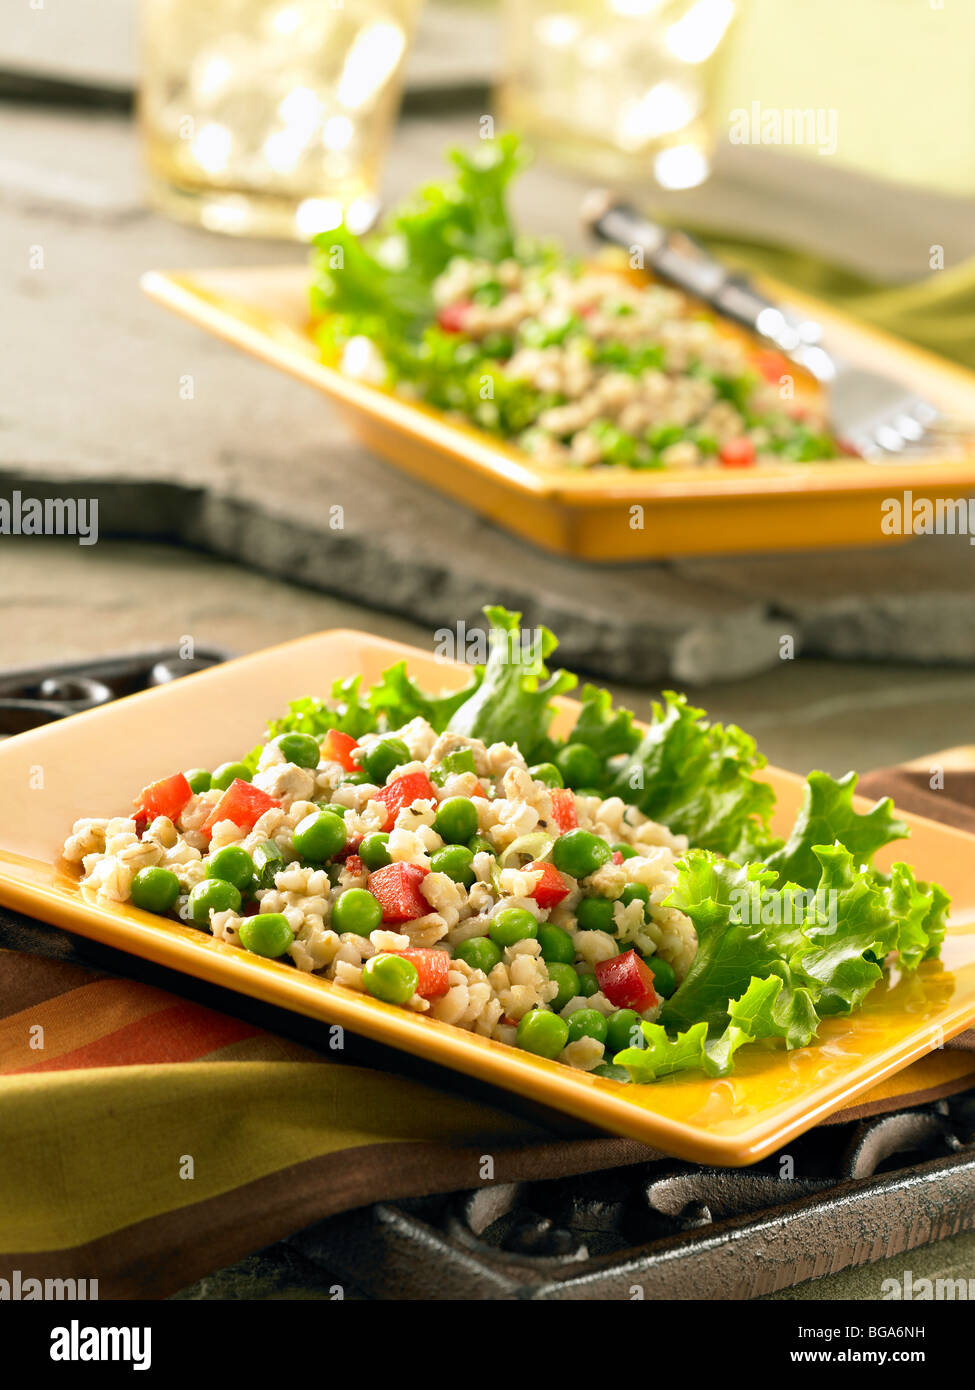 Barley green pea and red pepper salad Stock Photo